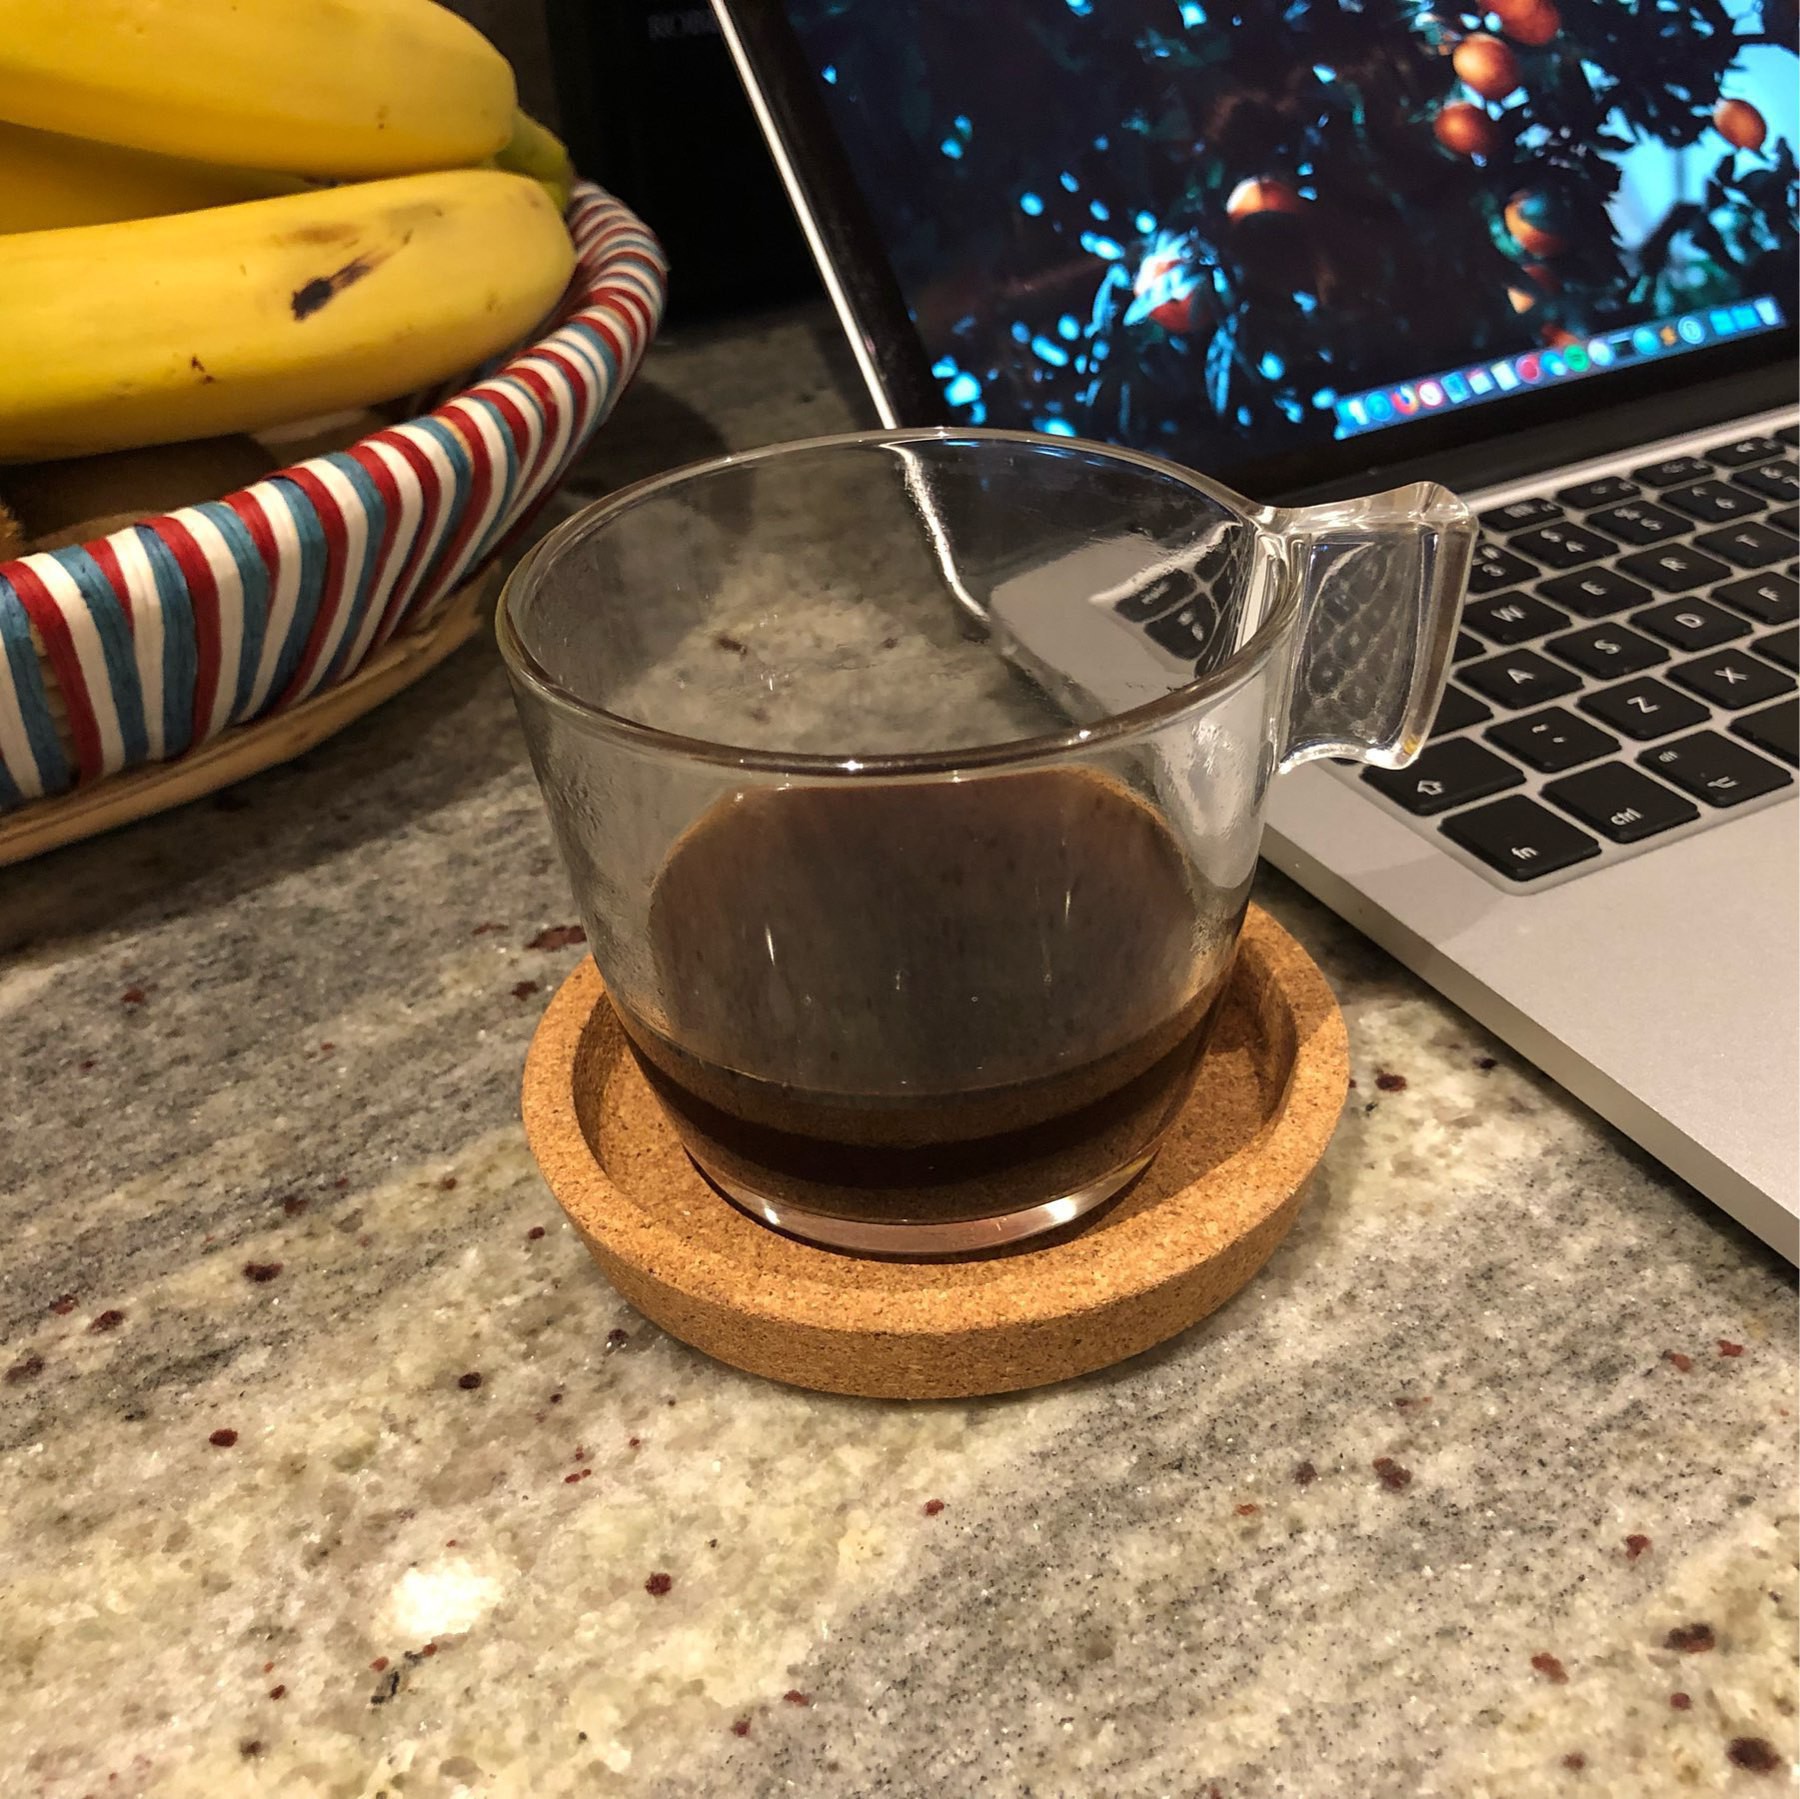 Coffee in a glass cup made with the Bialetti Moka Express